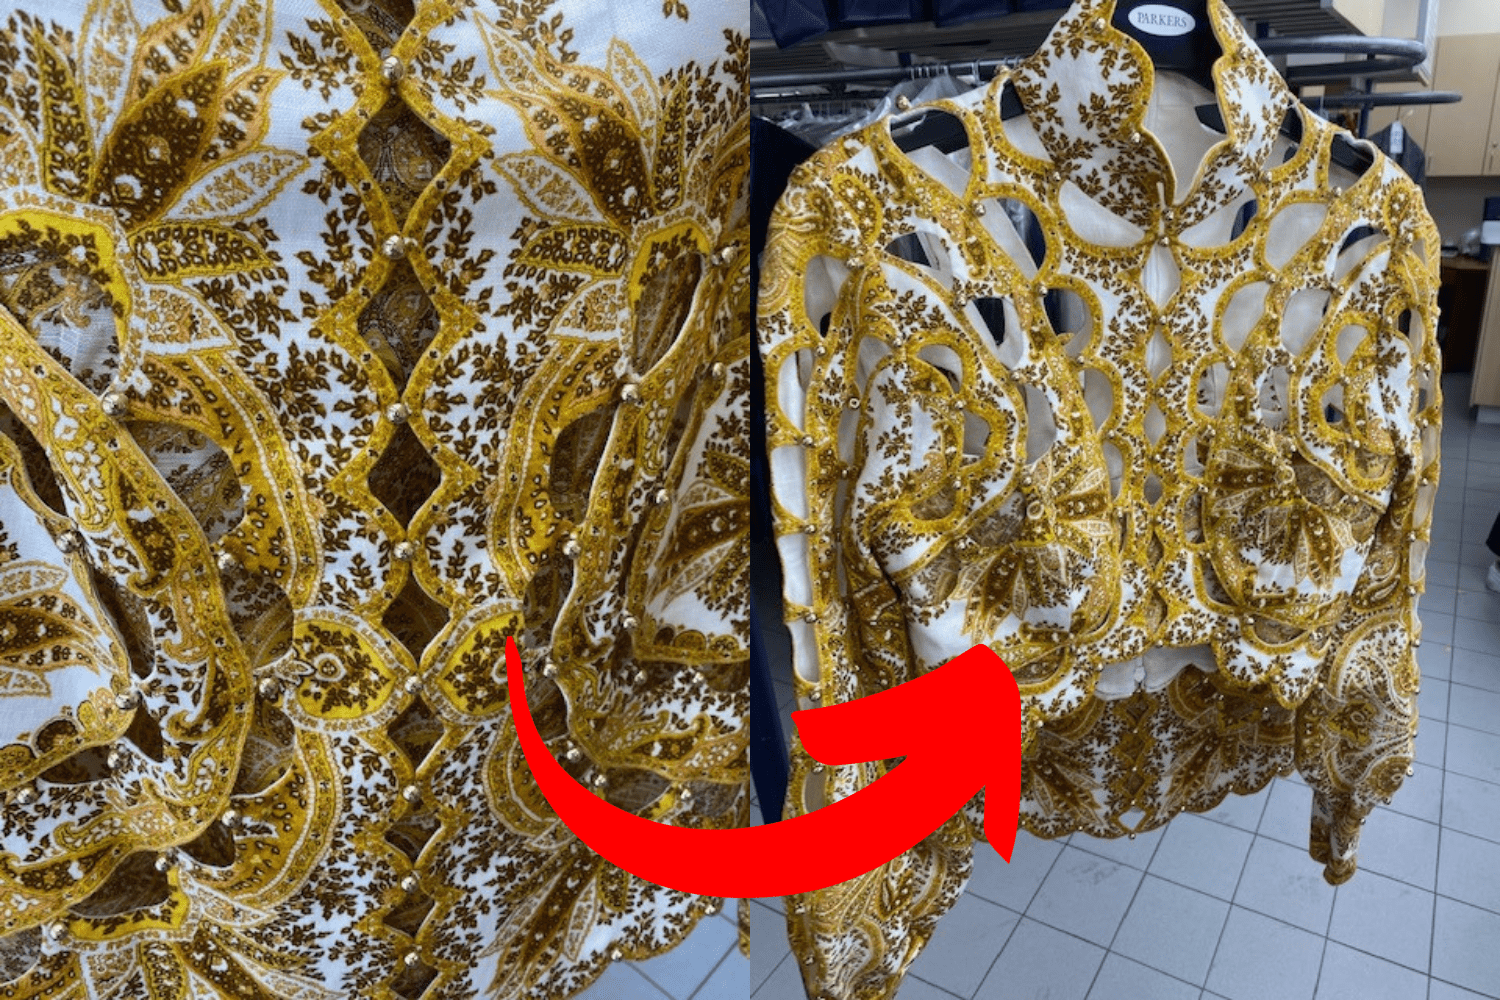 Professionally Cleaning High-End Sequin Dresses